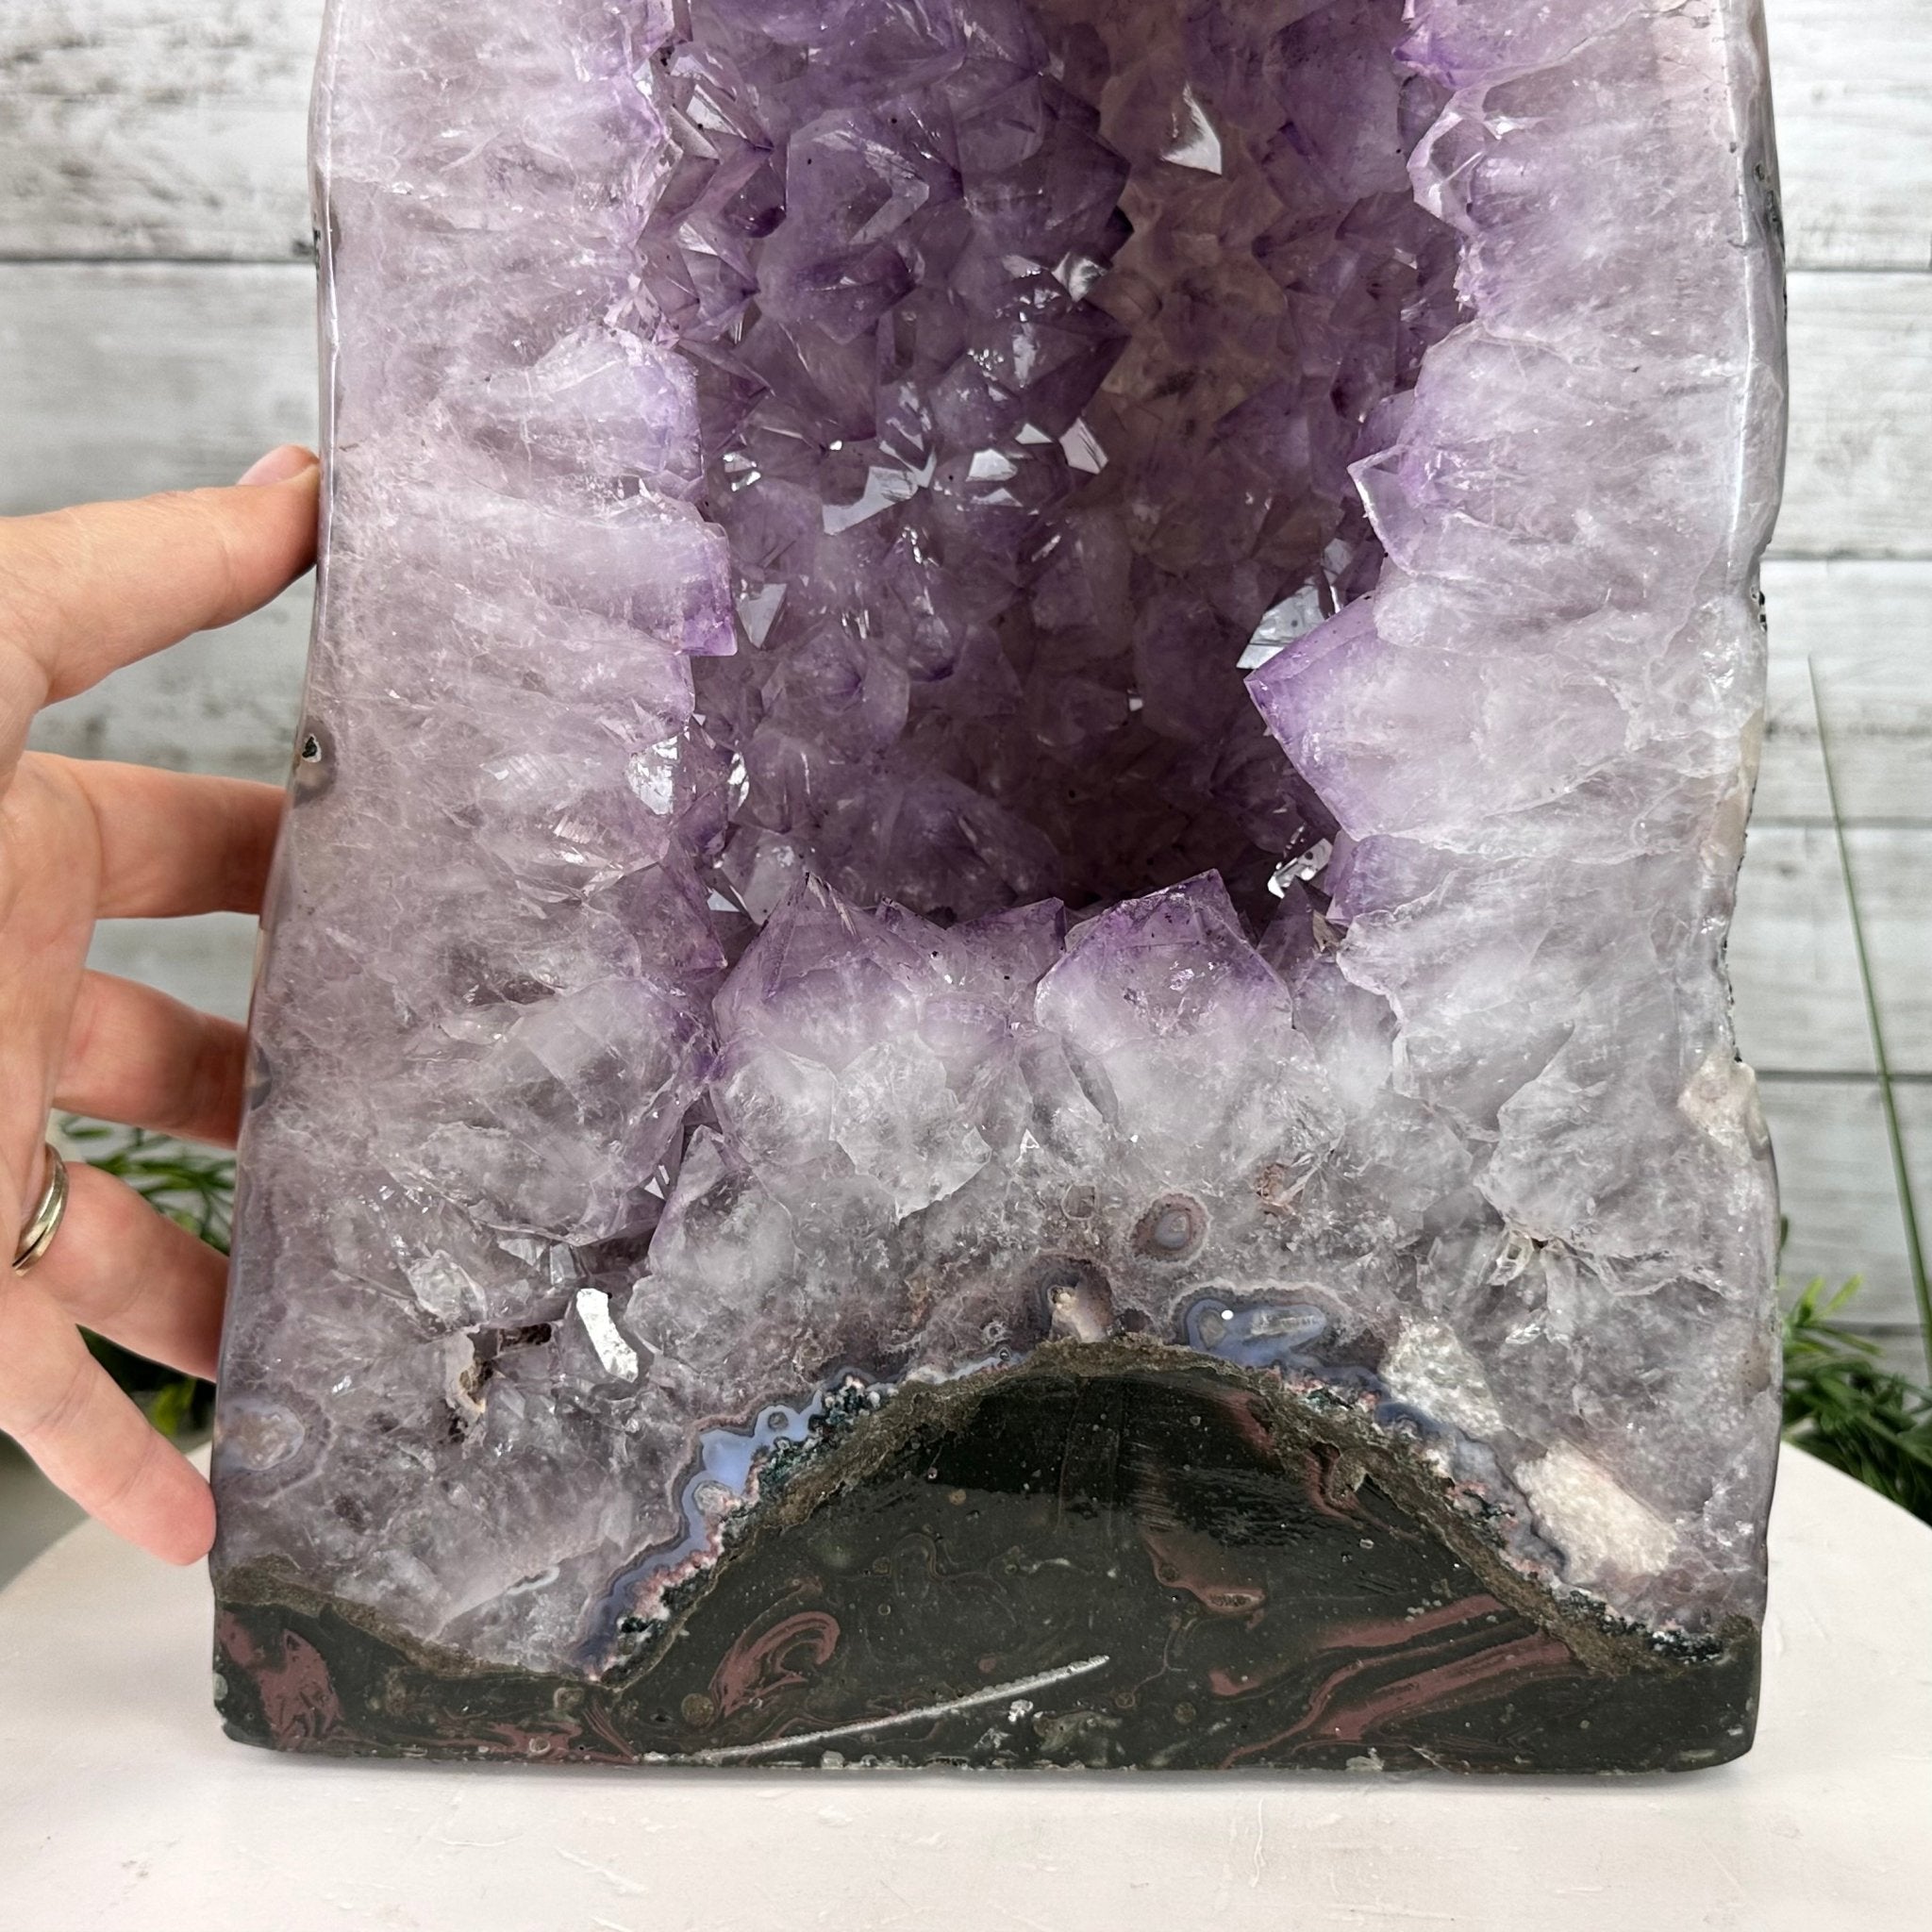 Standard Plus Quality Polished Brazilian Amethyst Cathedral, 46.1 lbs & 17.5" tall Model #5602-0192 by Brazil Gems - Brazil GemsBrazil GemsStandard Plus Quality Polished Brazilian Amethyst Cathedral, 46.1 lbs & 17.5" tall Model #5602-0192 by Brazil GemsPolished Cathedrals5602-0192